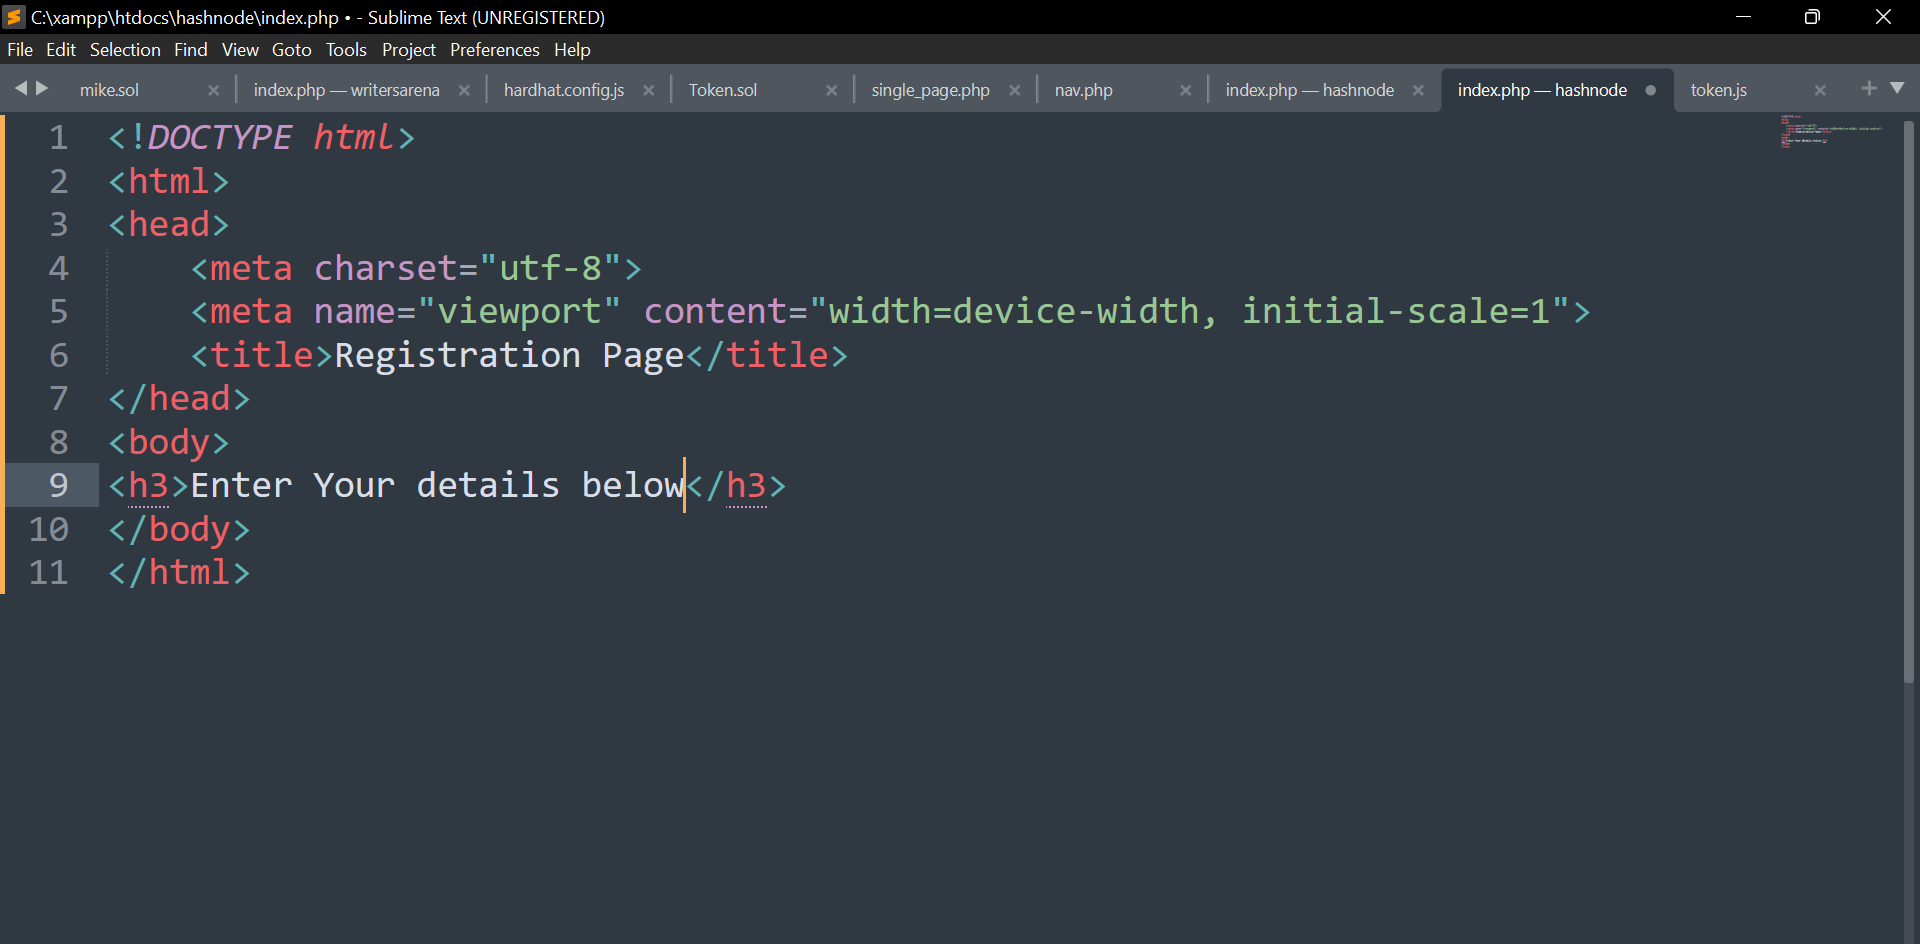 C__xampp_htdocs_hashnode_index.php  - Sublime Text (UNREGISTERED) 30-Sep-22 2_26_42 PM.png